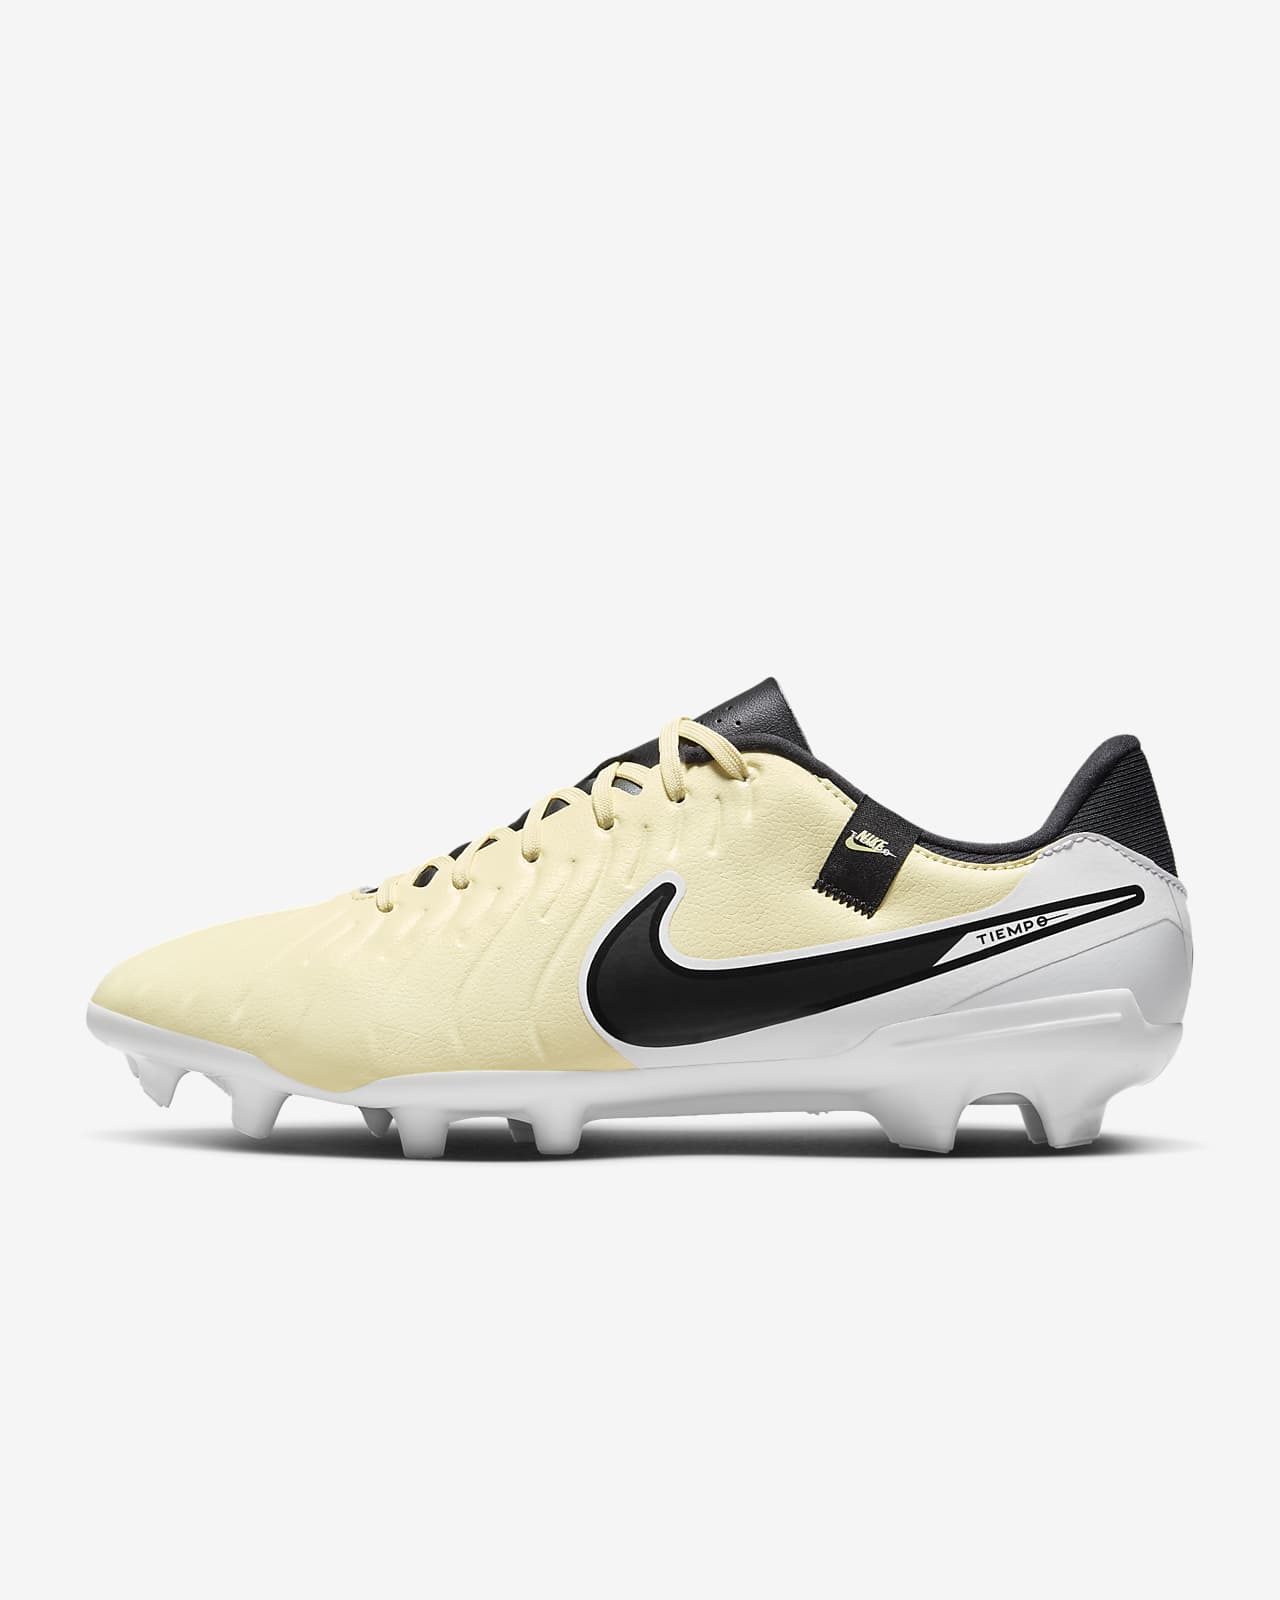 Soccer Low-Top Nike Academy Cleats. 10 Legend Multi-Ground Tiempo